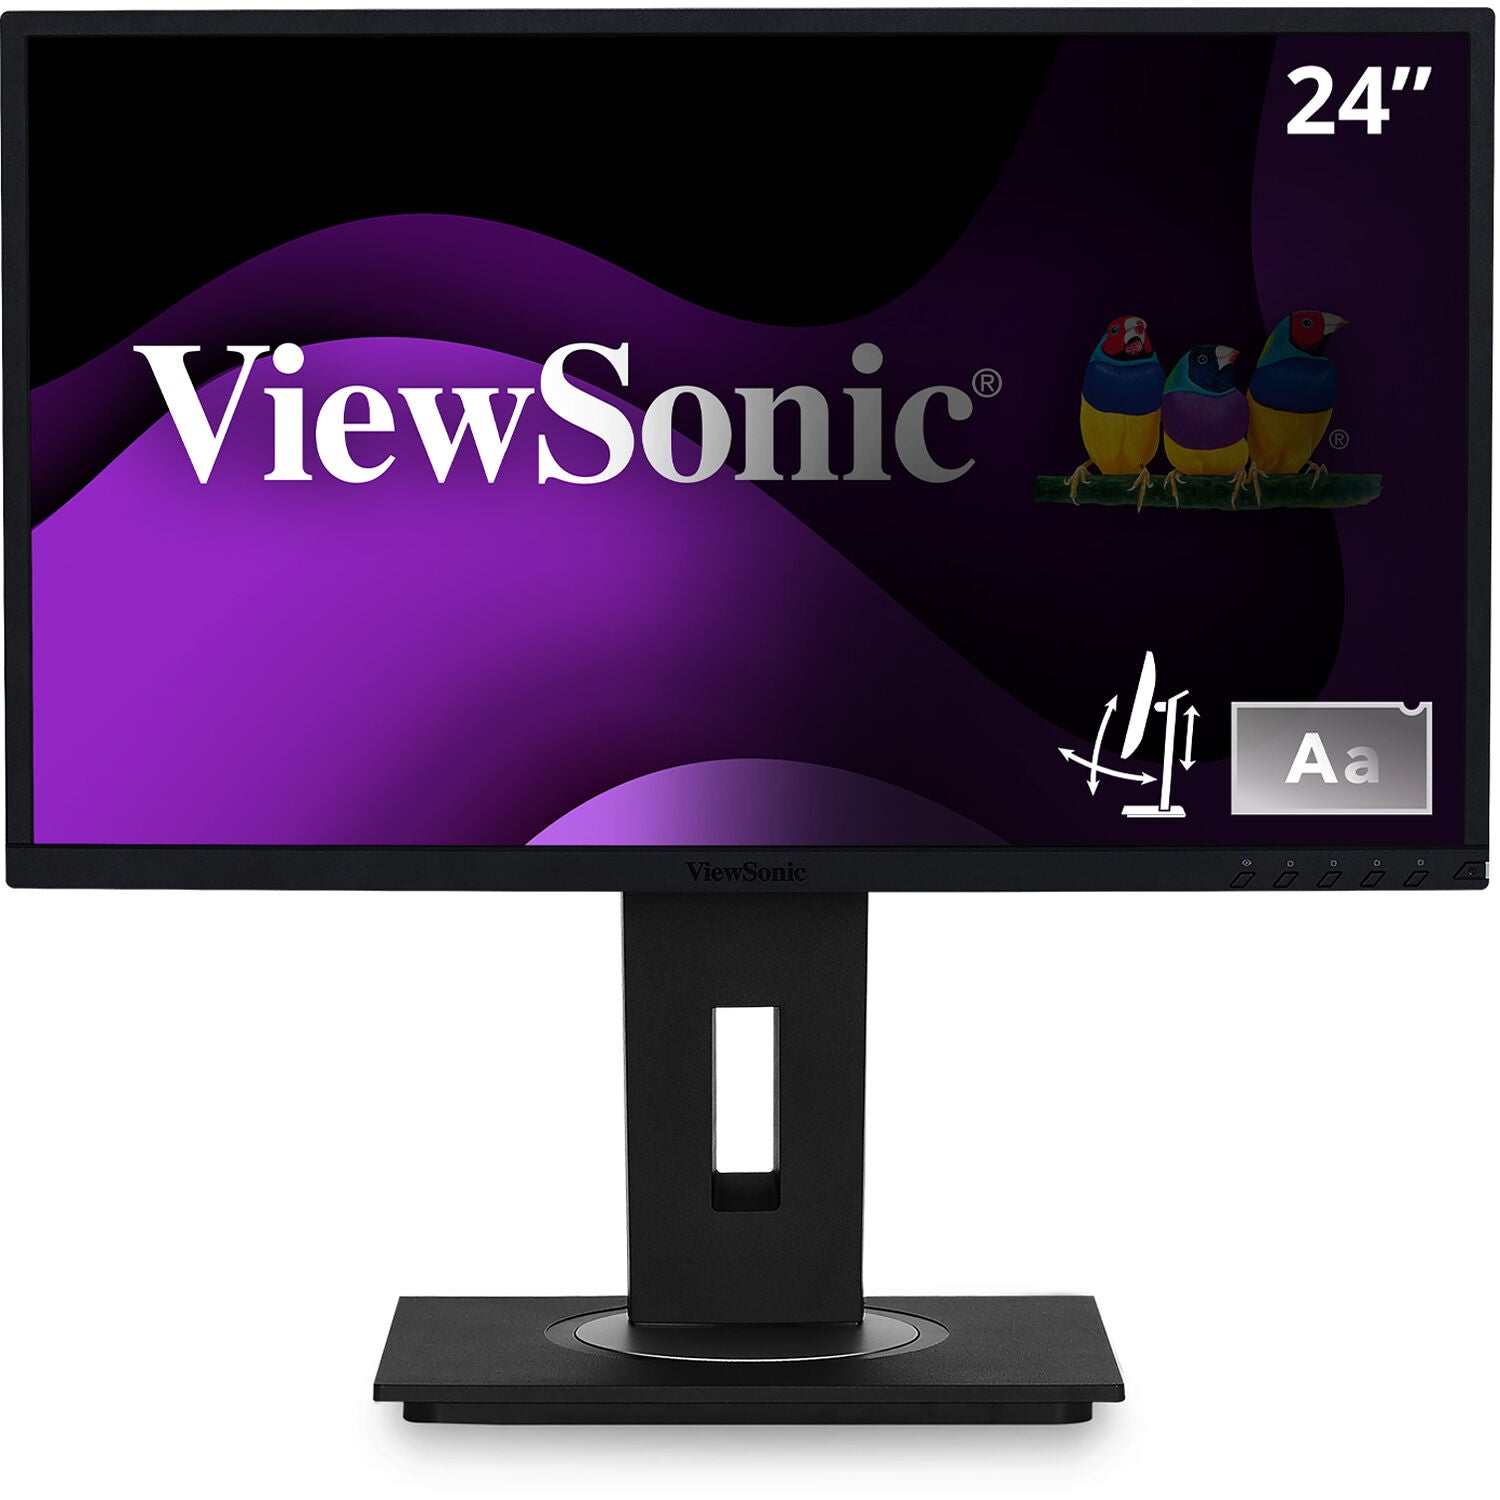 ViewSonic VG2448-PF-S 23.8" 16:9 Integrated Privacy Filter IPS Monitor - Certified Refurbished